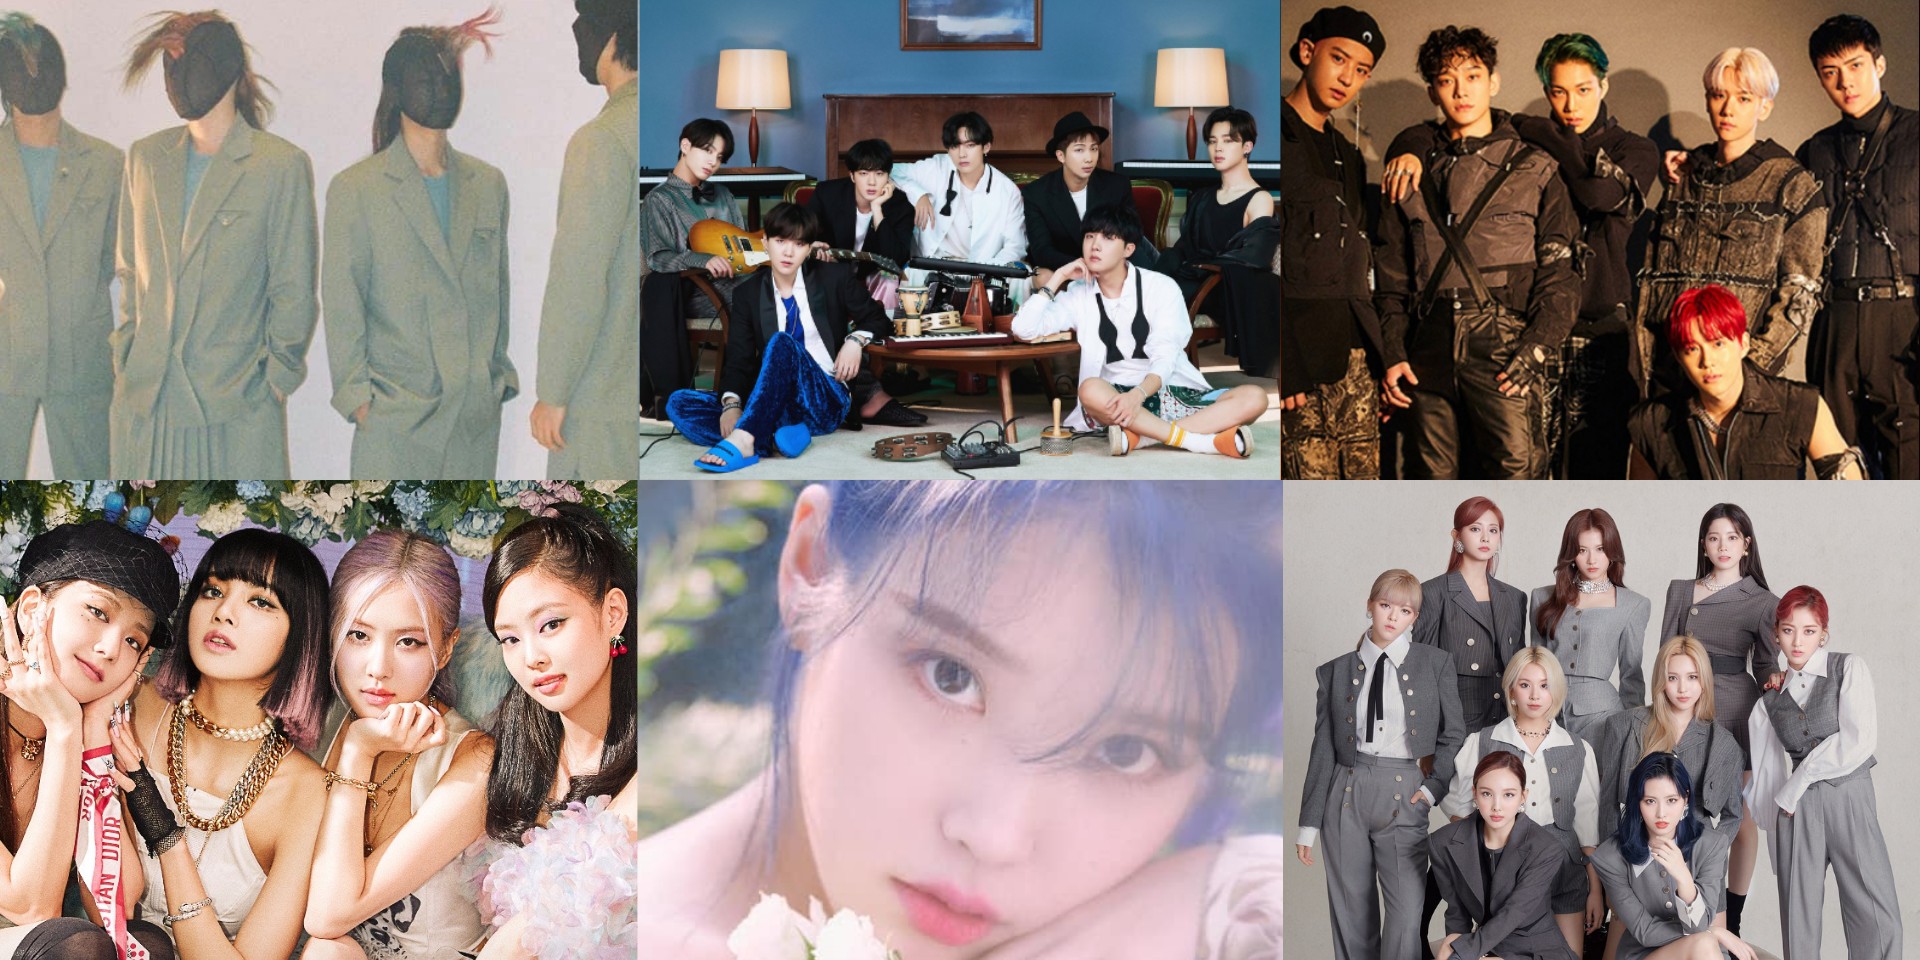 Mnet Asian Music Awards announce 2020 nominees – BTS, IU, HYUKOH, TWICE, EXO, BLACKPINK, and more